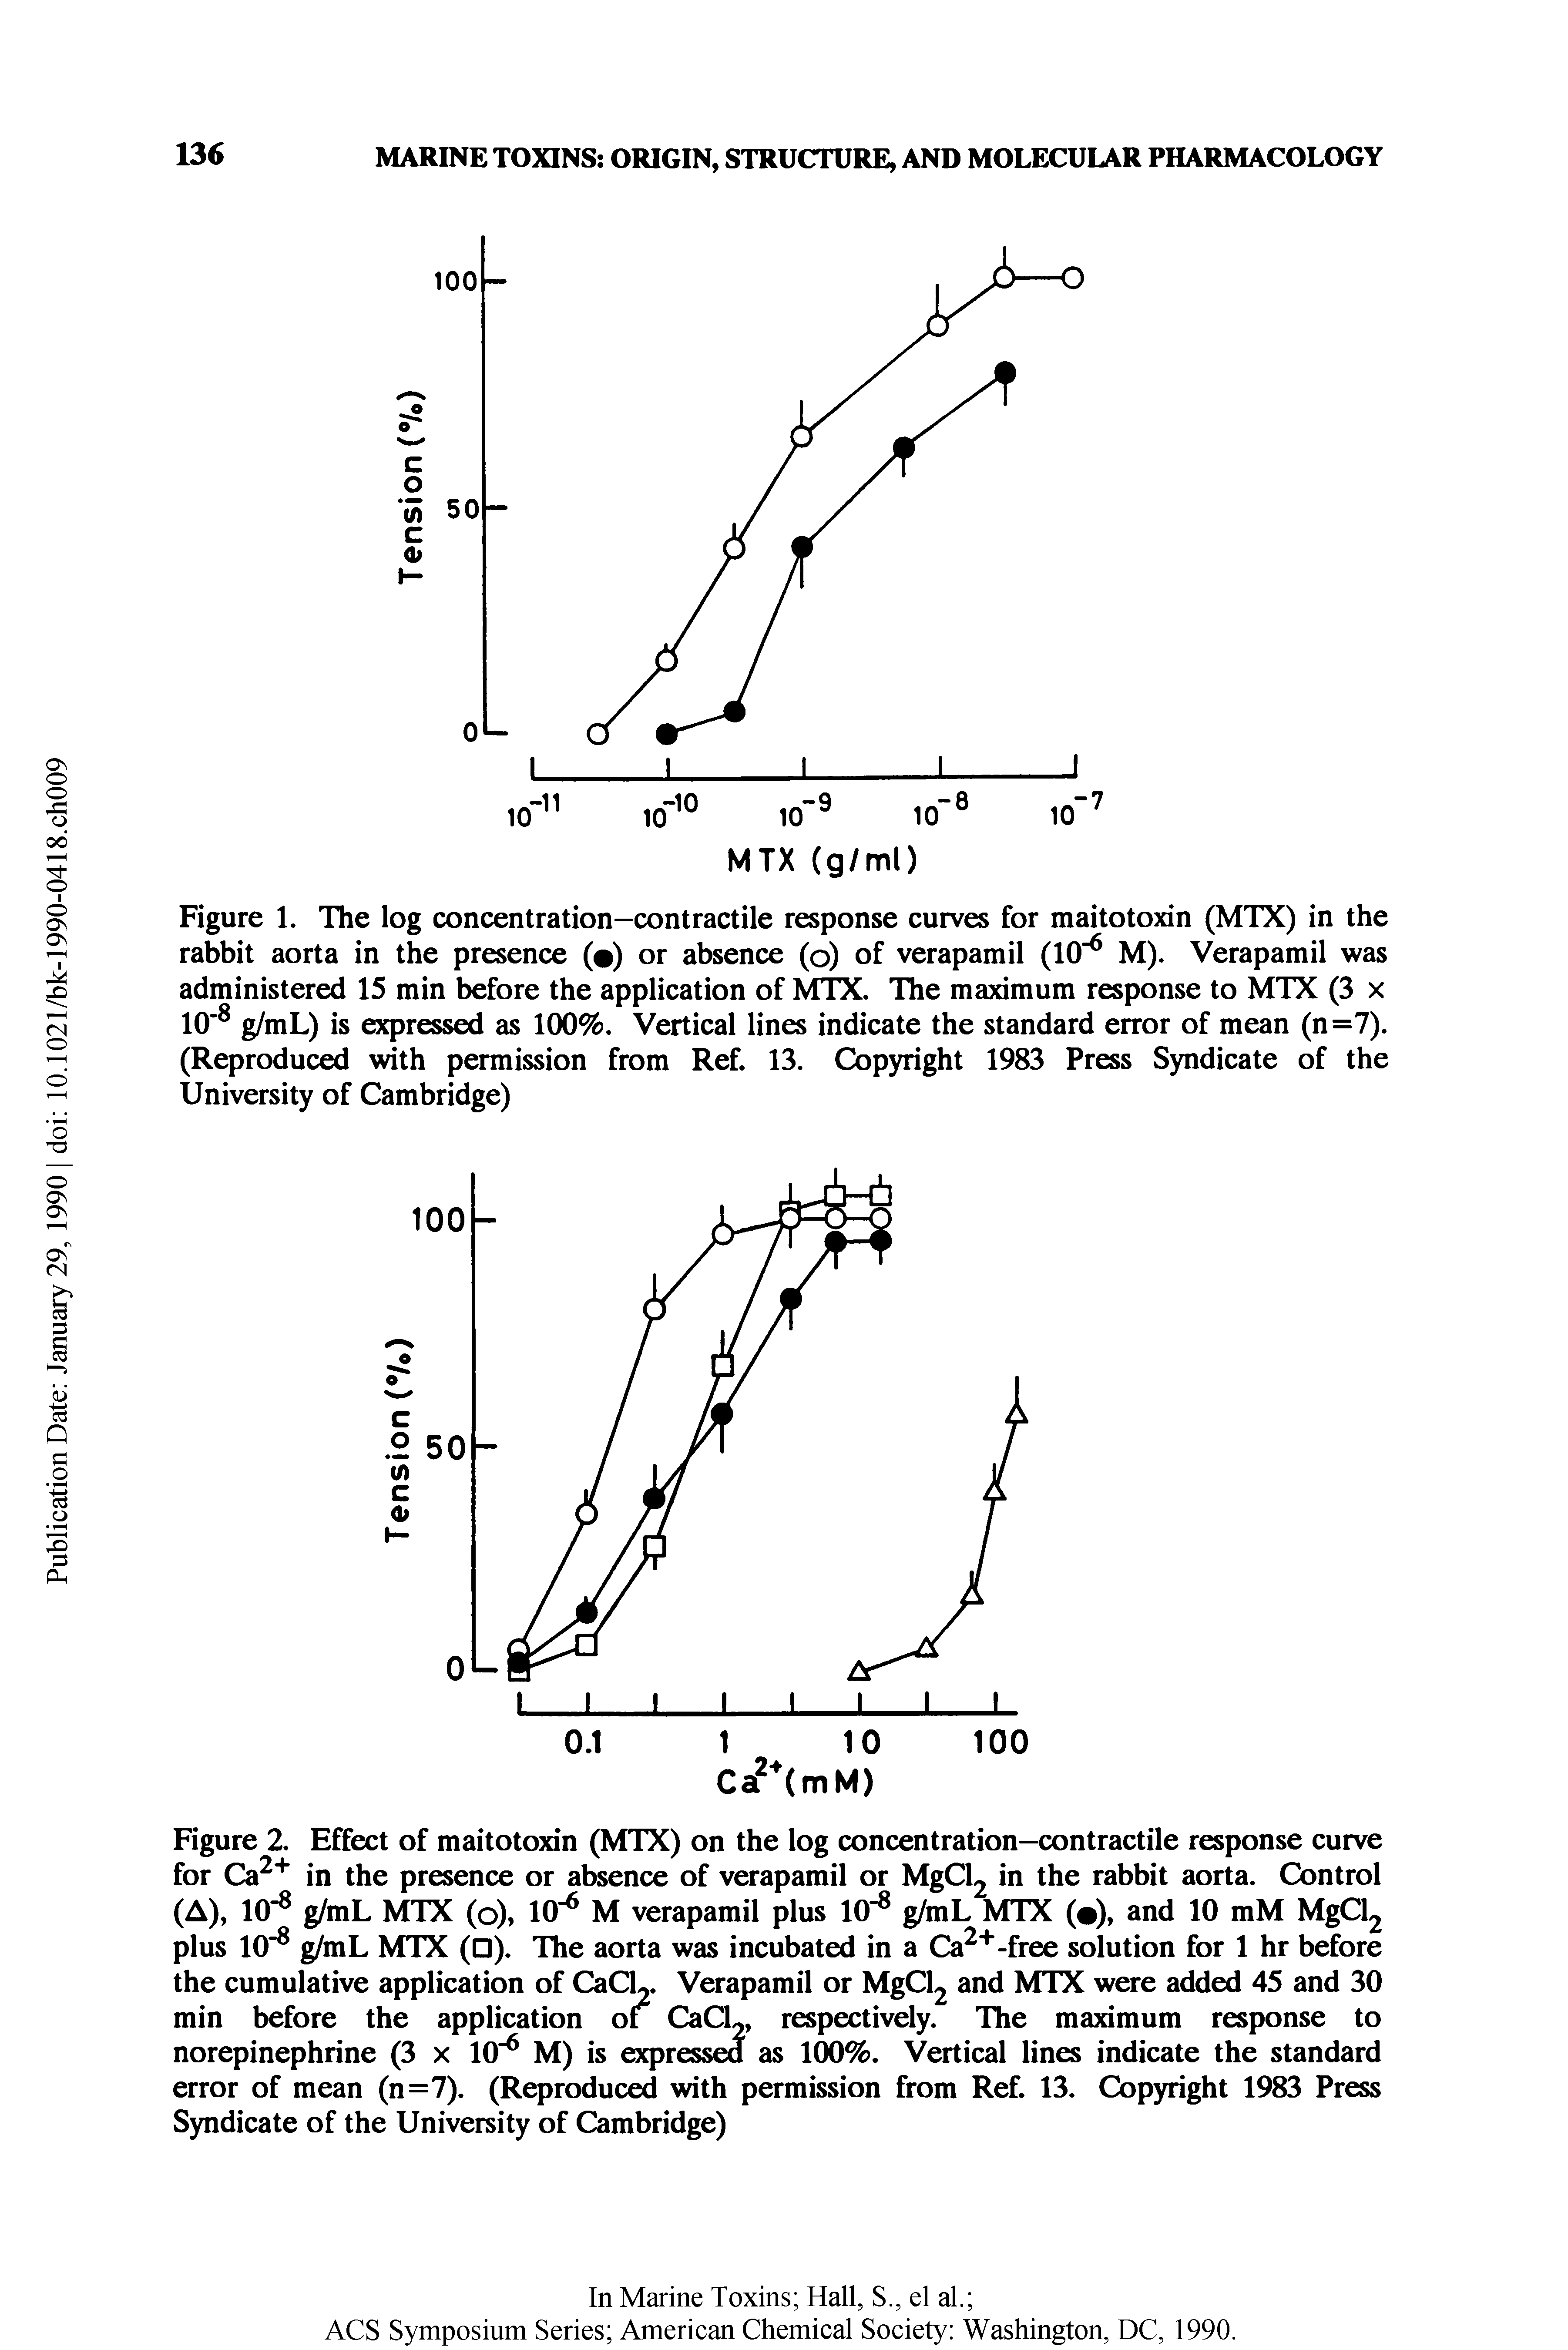 Figure 2. Effect of maitotoxin (MTX) on the log concentration—contractile response curve for Ca in the presence or absence of verapamil or MgCl2 in the rabbit aorta. Control (A), 10" g/mL MTX (o), 10" M verapamil plus 10 g/mL MTX ( ), and 10 mM MgCl2 plus 10" g/mL MTX ( ). The aorta was incubated in a Ca -free solution for 1 hr before the cumulative application of CaCL. Verapamil or MgCl2 and MTX were added 45 and 30 min before the application of CaCL, respectively. The maximum response to norepinephrine (3 x 10" M) is expressed as 100%. Vertical lines indicate the standard error of mean (n=7). (Reproduced with permission from Ref. 13. Copyright 1983 Press Syndicate of the University of Cambridge)...